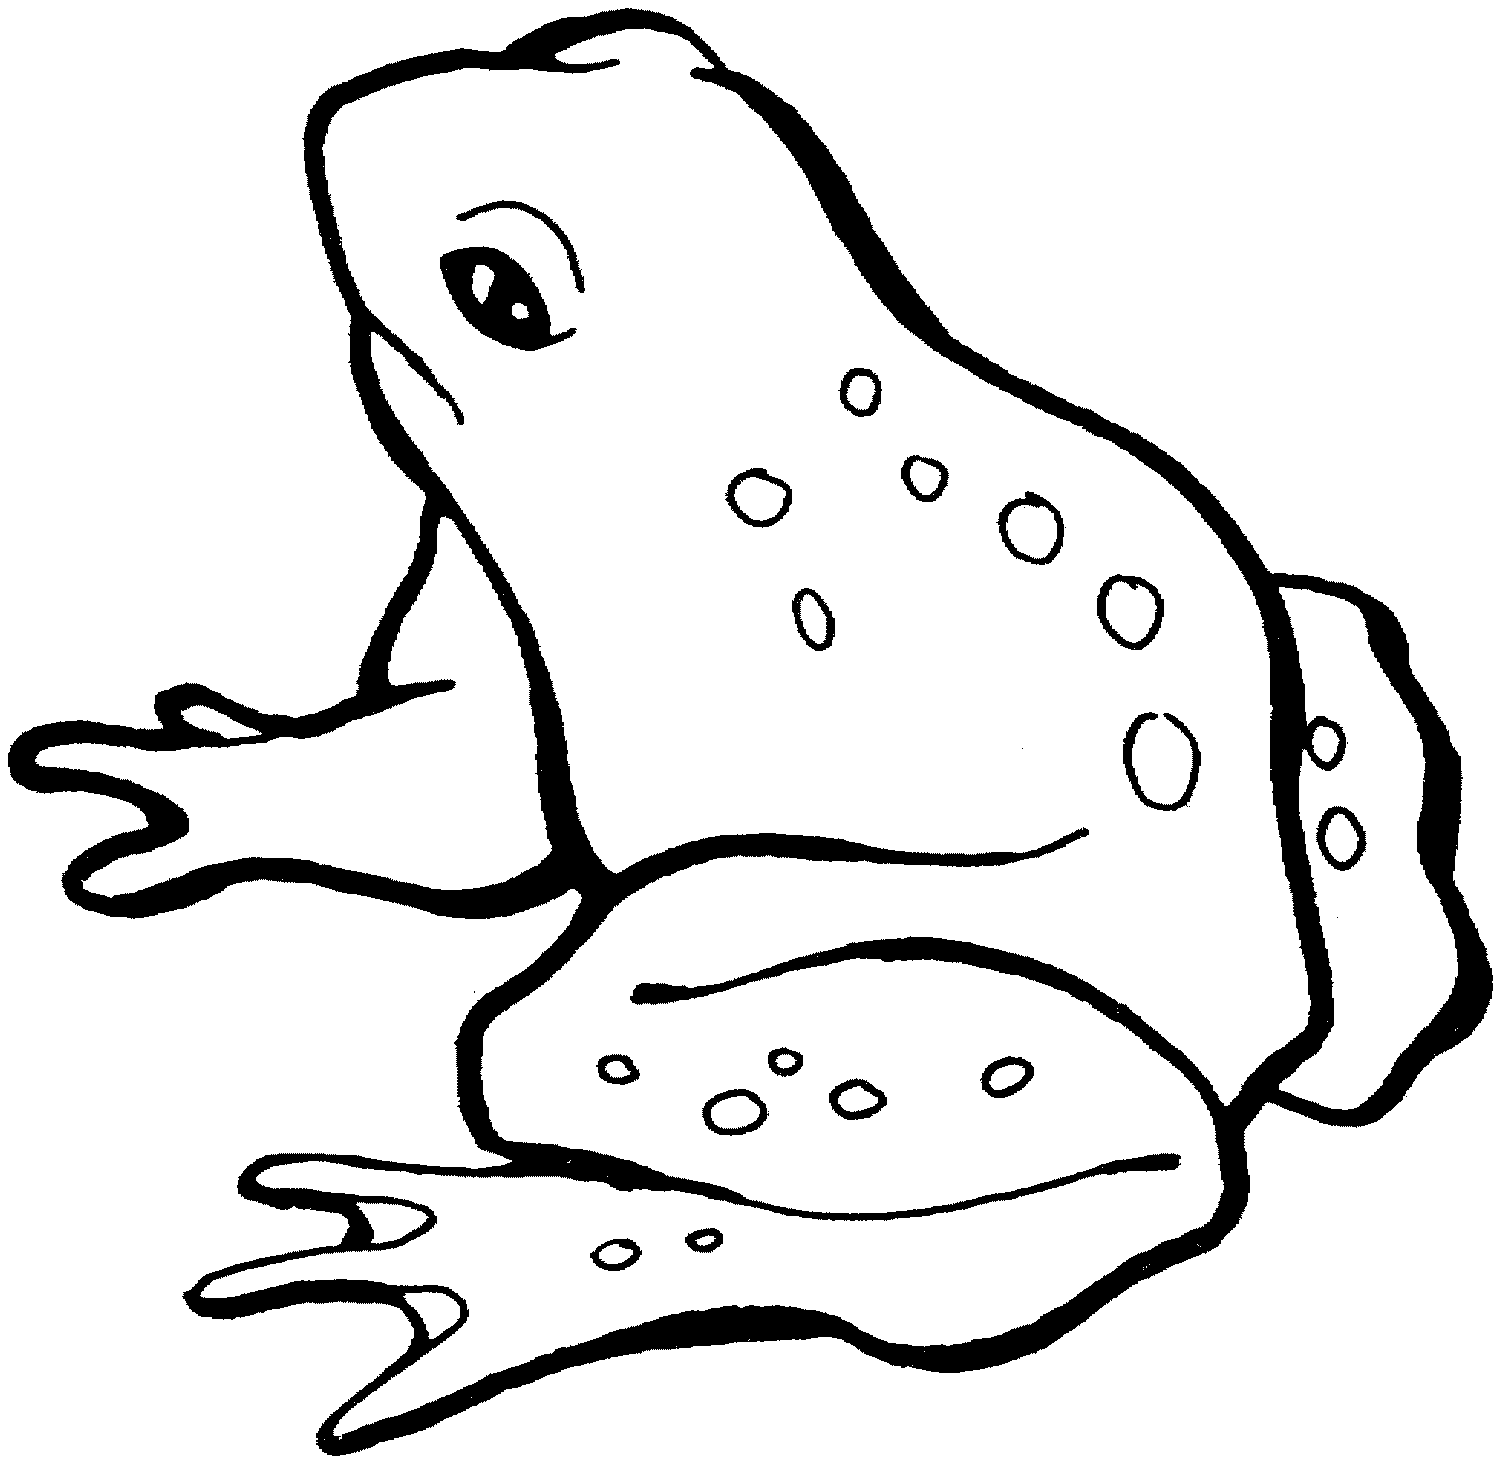 Frog clipart walking free clipart image